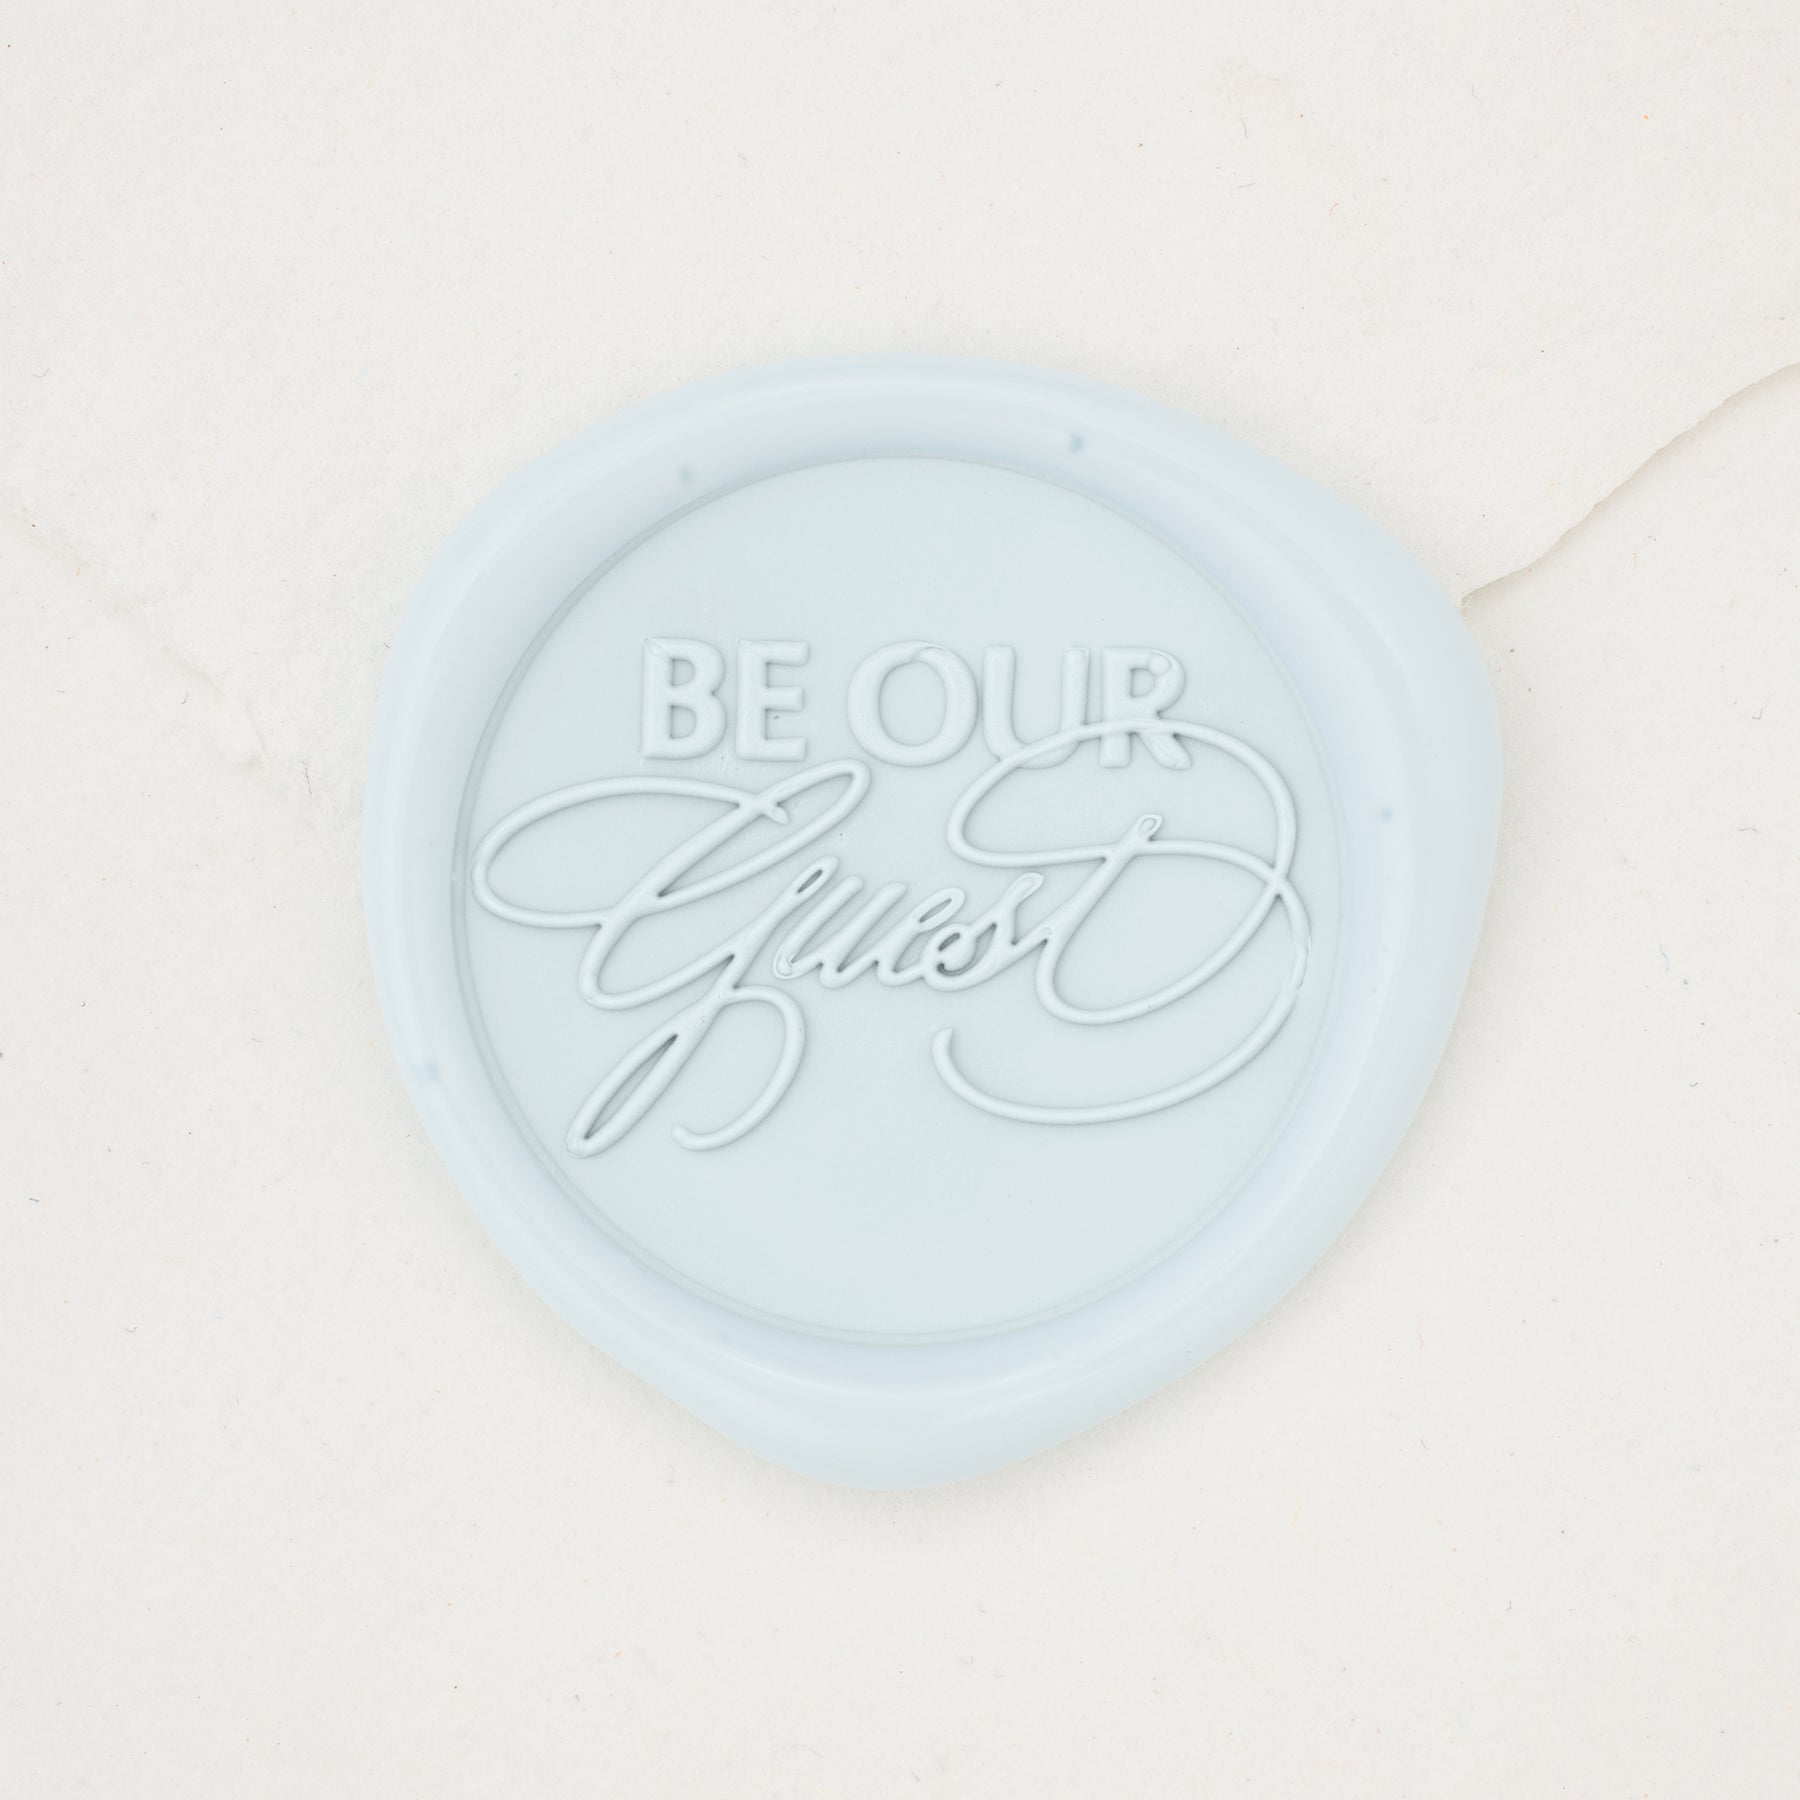 Be our Guest' Fairytale Personalised Envelope Seals - BlueBird